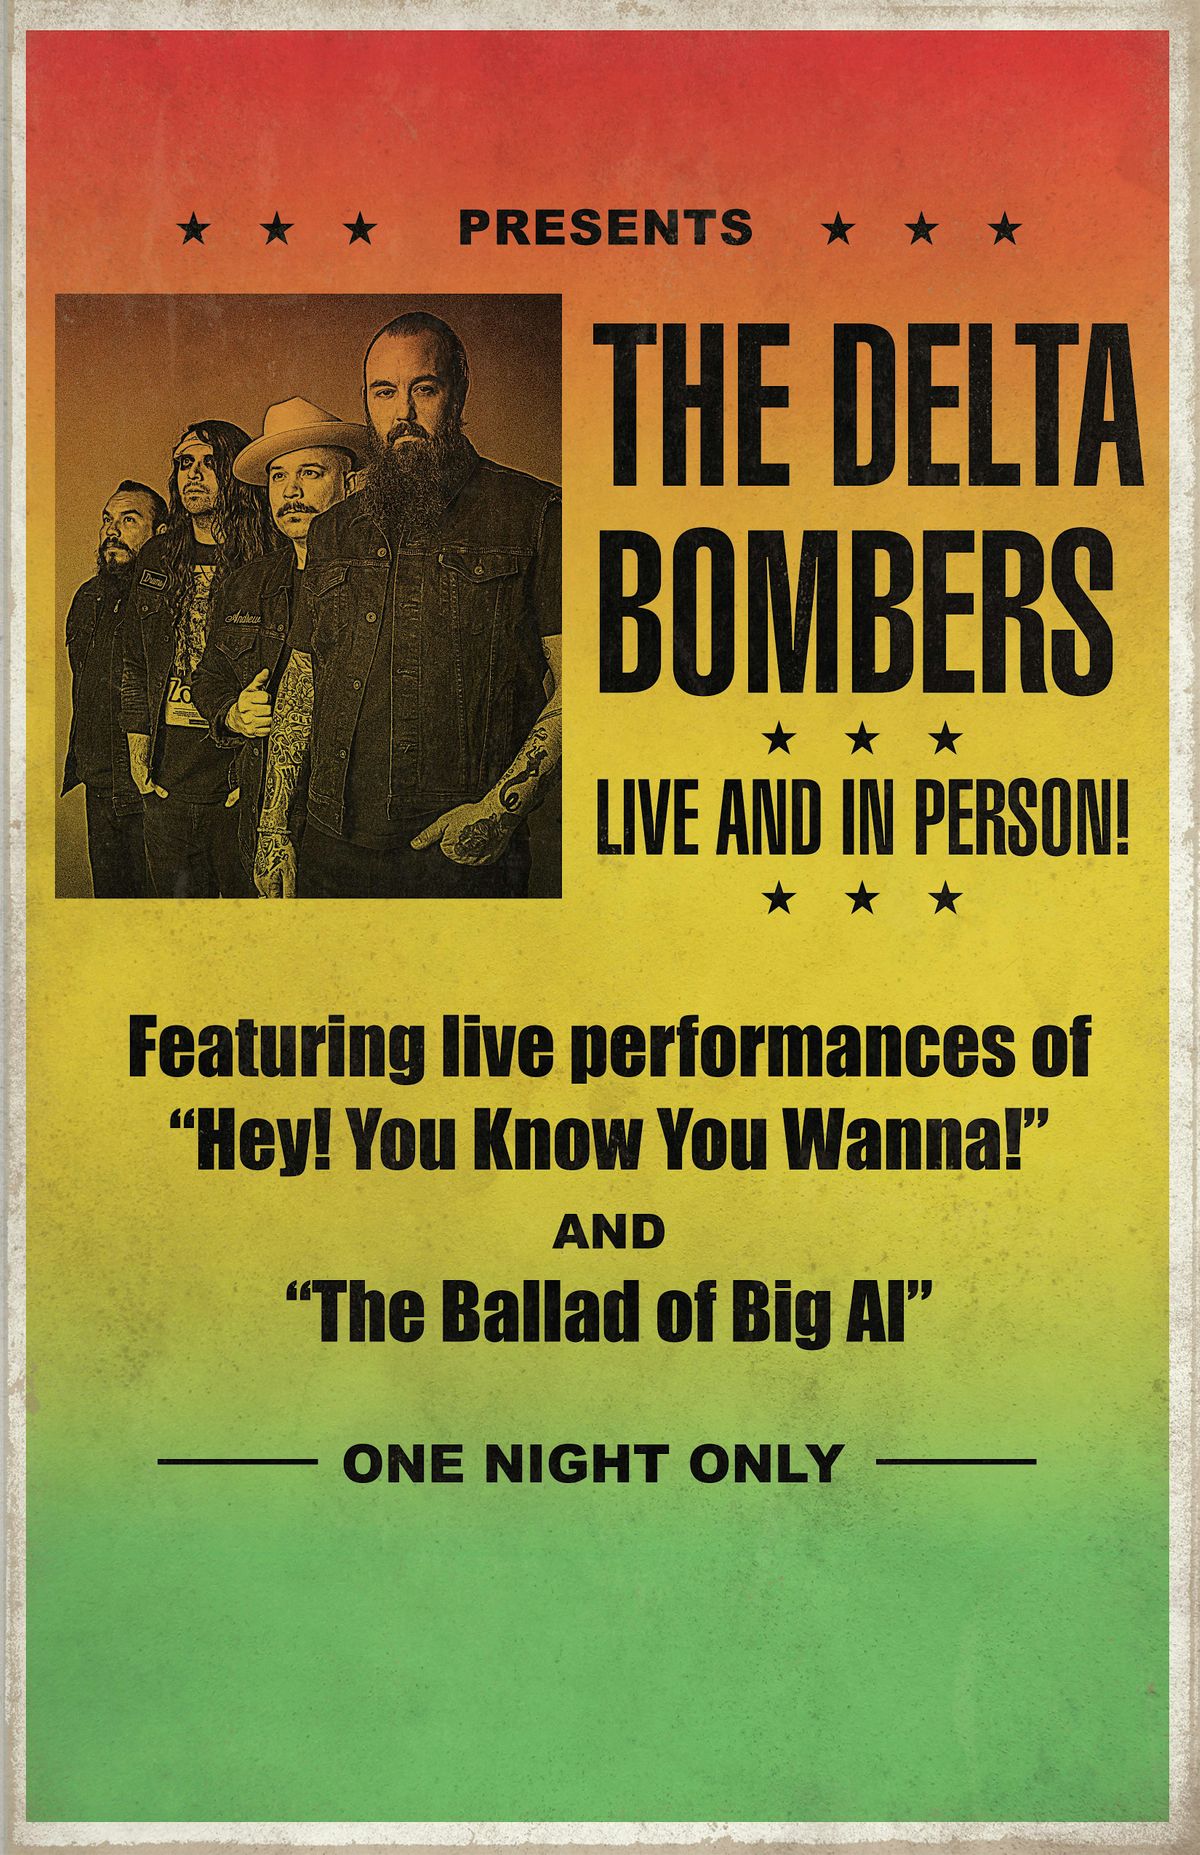 3rd Annual Rocktoberfest with The Delta Bombers